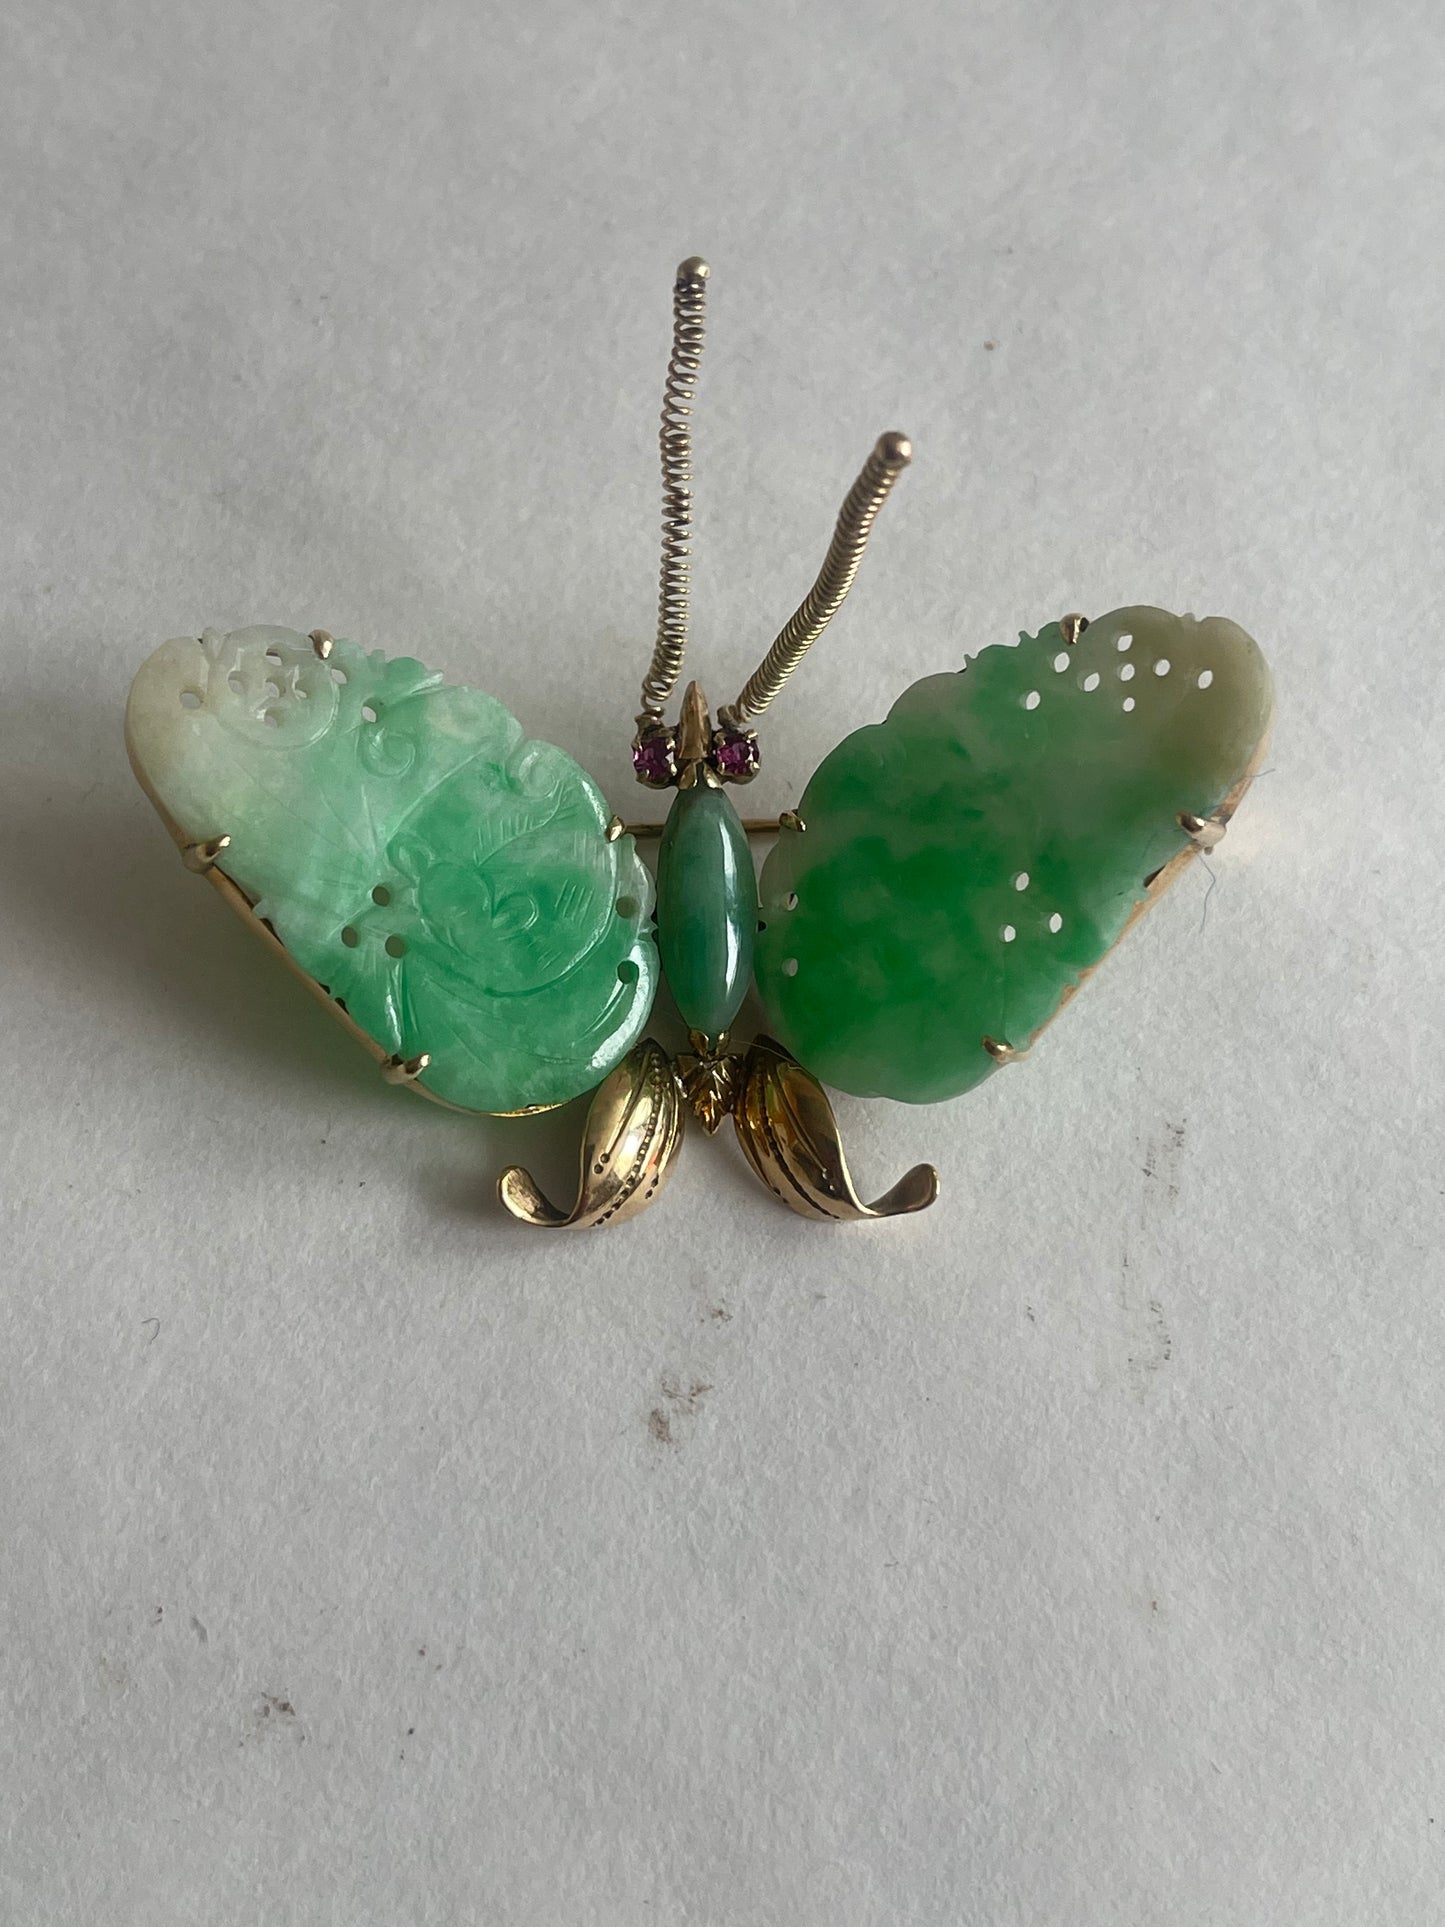 A vintage butterfly shaped brooch with jade and 14kt gold